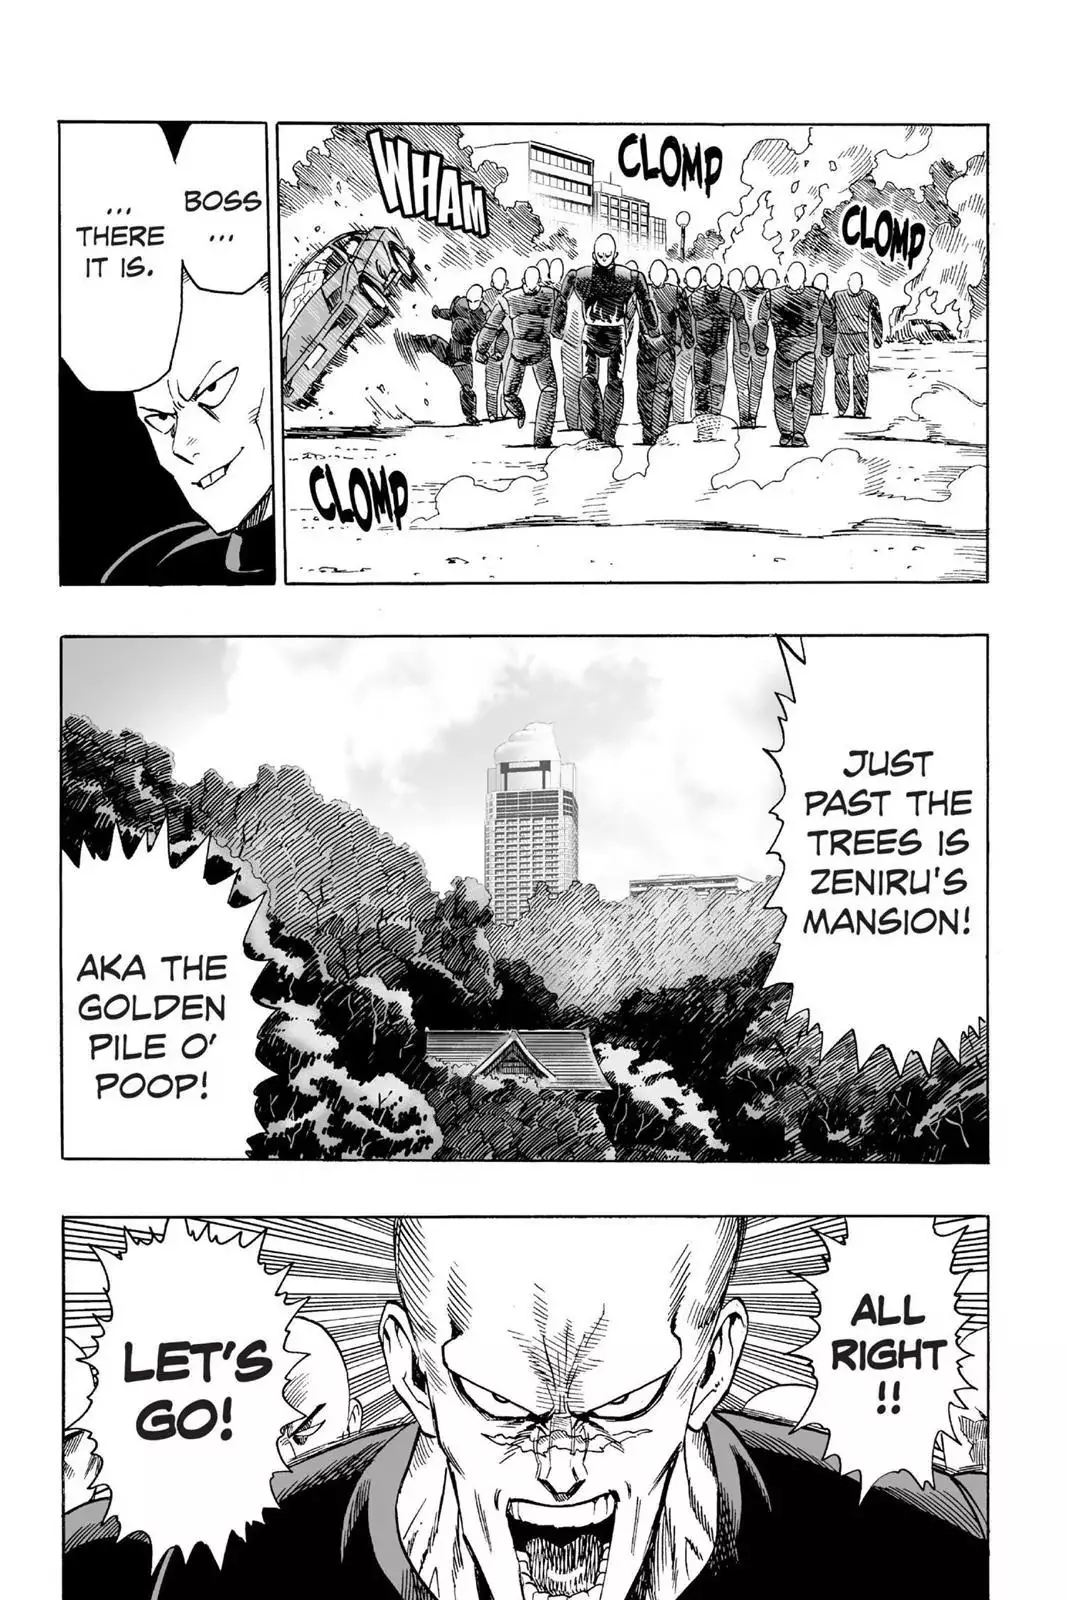 One Punch Man Chapter 12, READ One Punch Man Chapter 12 ONLINE, lost in the cloud genre,lost in the cloud gif,lost in the cloud girl,lost in the cloud goods,lost in the cloud goodreads,lost in the cloud,lost ark cloud gaming,lost odyssey cloud gaming,lost in the cloud fanart,lost in the cloud fanfic,lost in the cloud fandom,lost in the cloud first kiss,lost in the cloud font,lost in the cloud ending,lost in the cloud episode 97,lost in the cloud edit,lost in the cloud explained,lost in the cloud dog,lost in the cloud discord server,lost in the cloud desktop wallpaper,lost in the cloud drawing,can't find my cloud on network,lost in the cloud characters,lost in the cloud chapter 93 release date,lost in the cloud birthday,lost in the cloud birthday art,lost in the cloud background,lost in the cloud banner,lost in the clouds meaning,what is the black cloud in lost,lost in the cloud ao3,lost in the cloud anime,lost in the cloud art,lost in the cloud author twitter,lost in the cloud author instagram,lost in the cloud artist,lost in the cloud acrylic stand,lost in the cloud artist twitter,lost in the cloud art style,lost in the cloud analysis